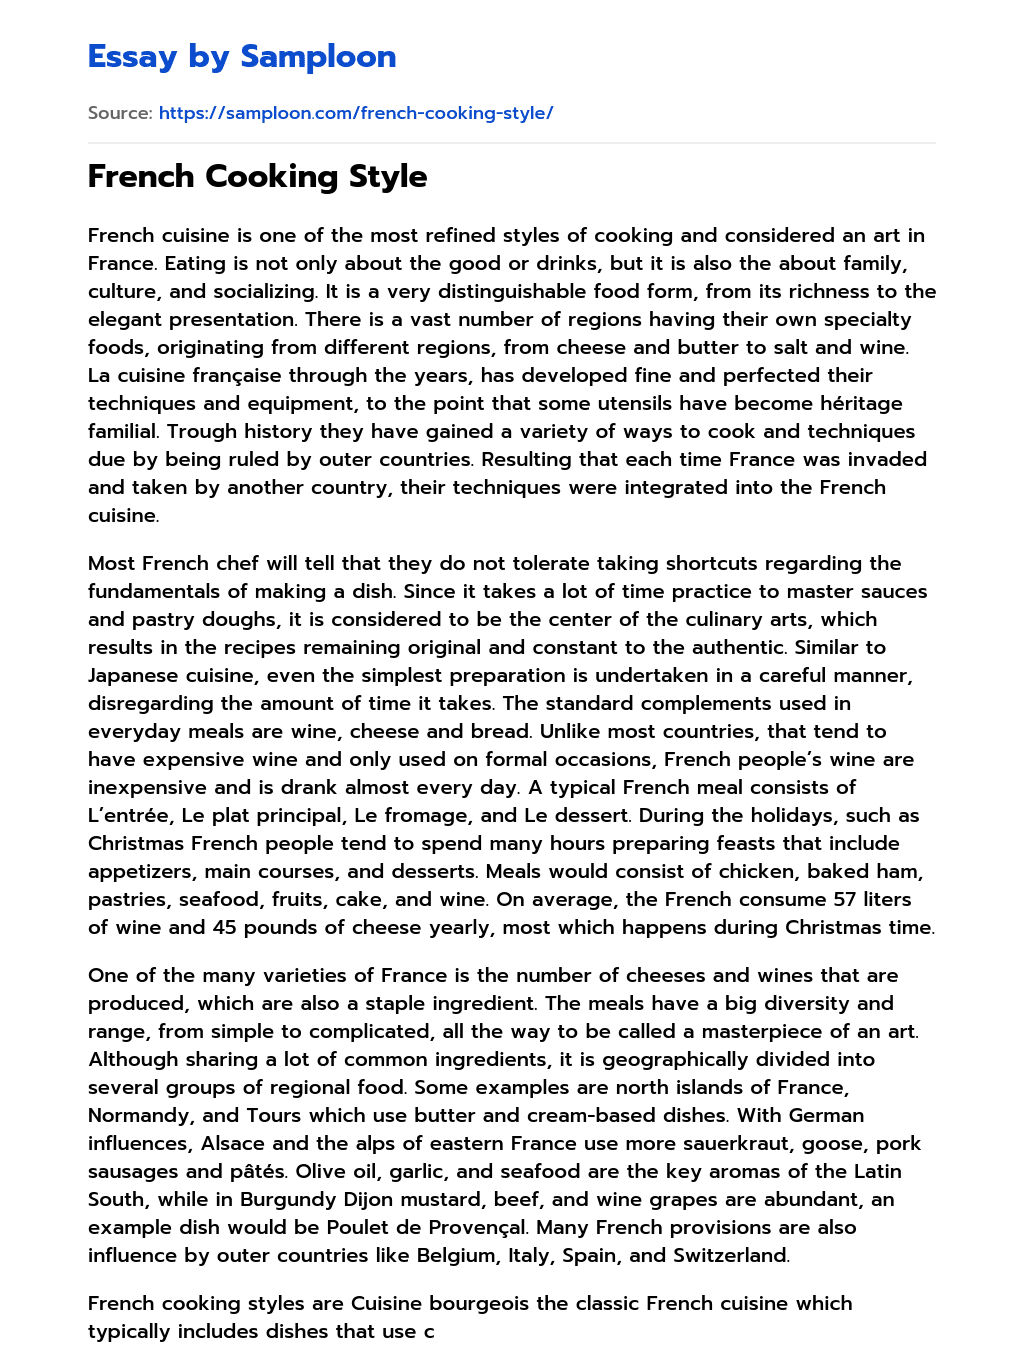 French Cooking Style essay